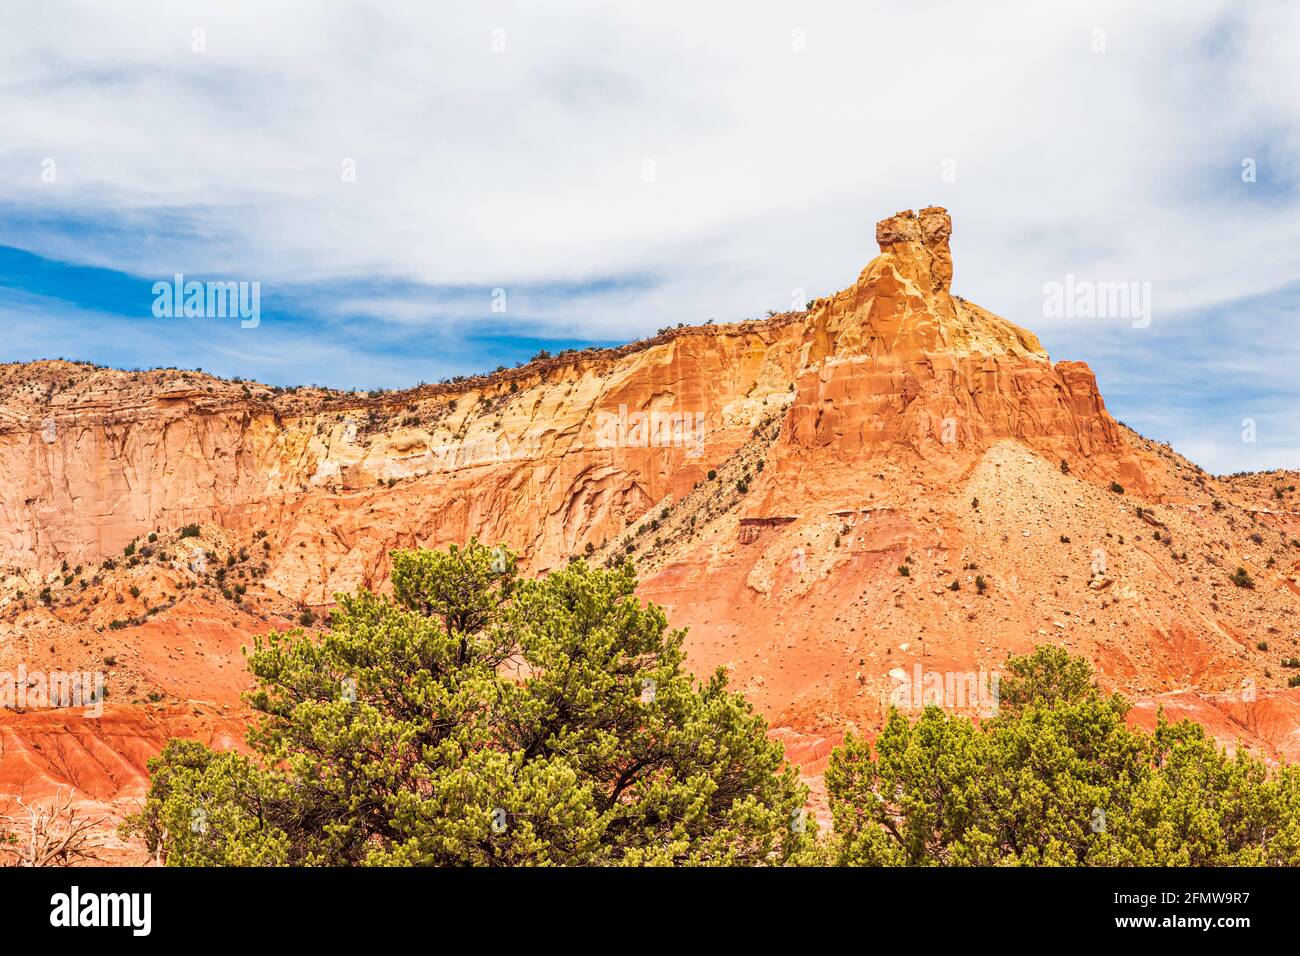 Landscape view of Chimney Rock at Abiquiu, New Mexico., USA. Stock Photo